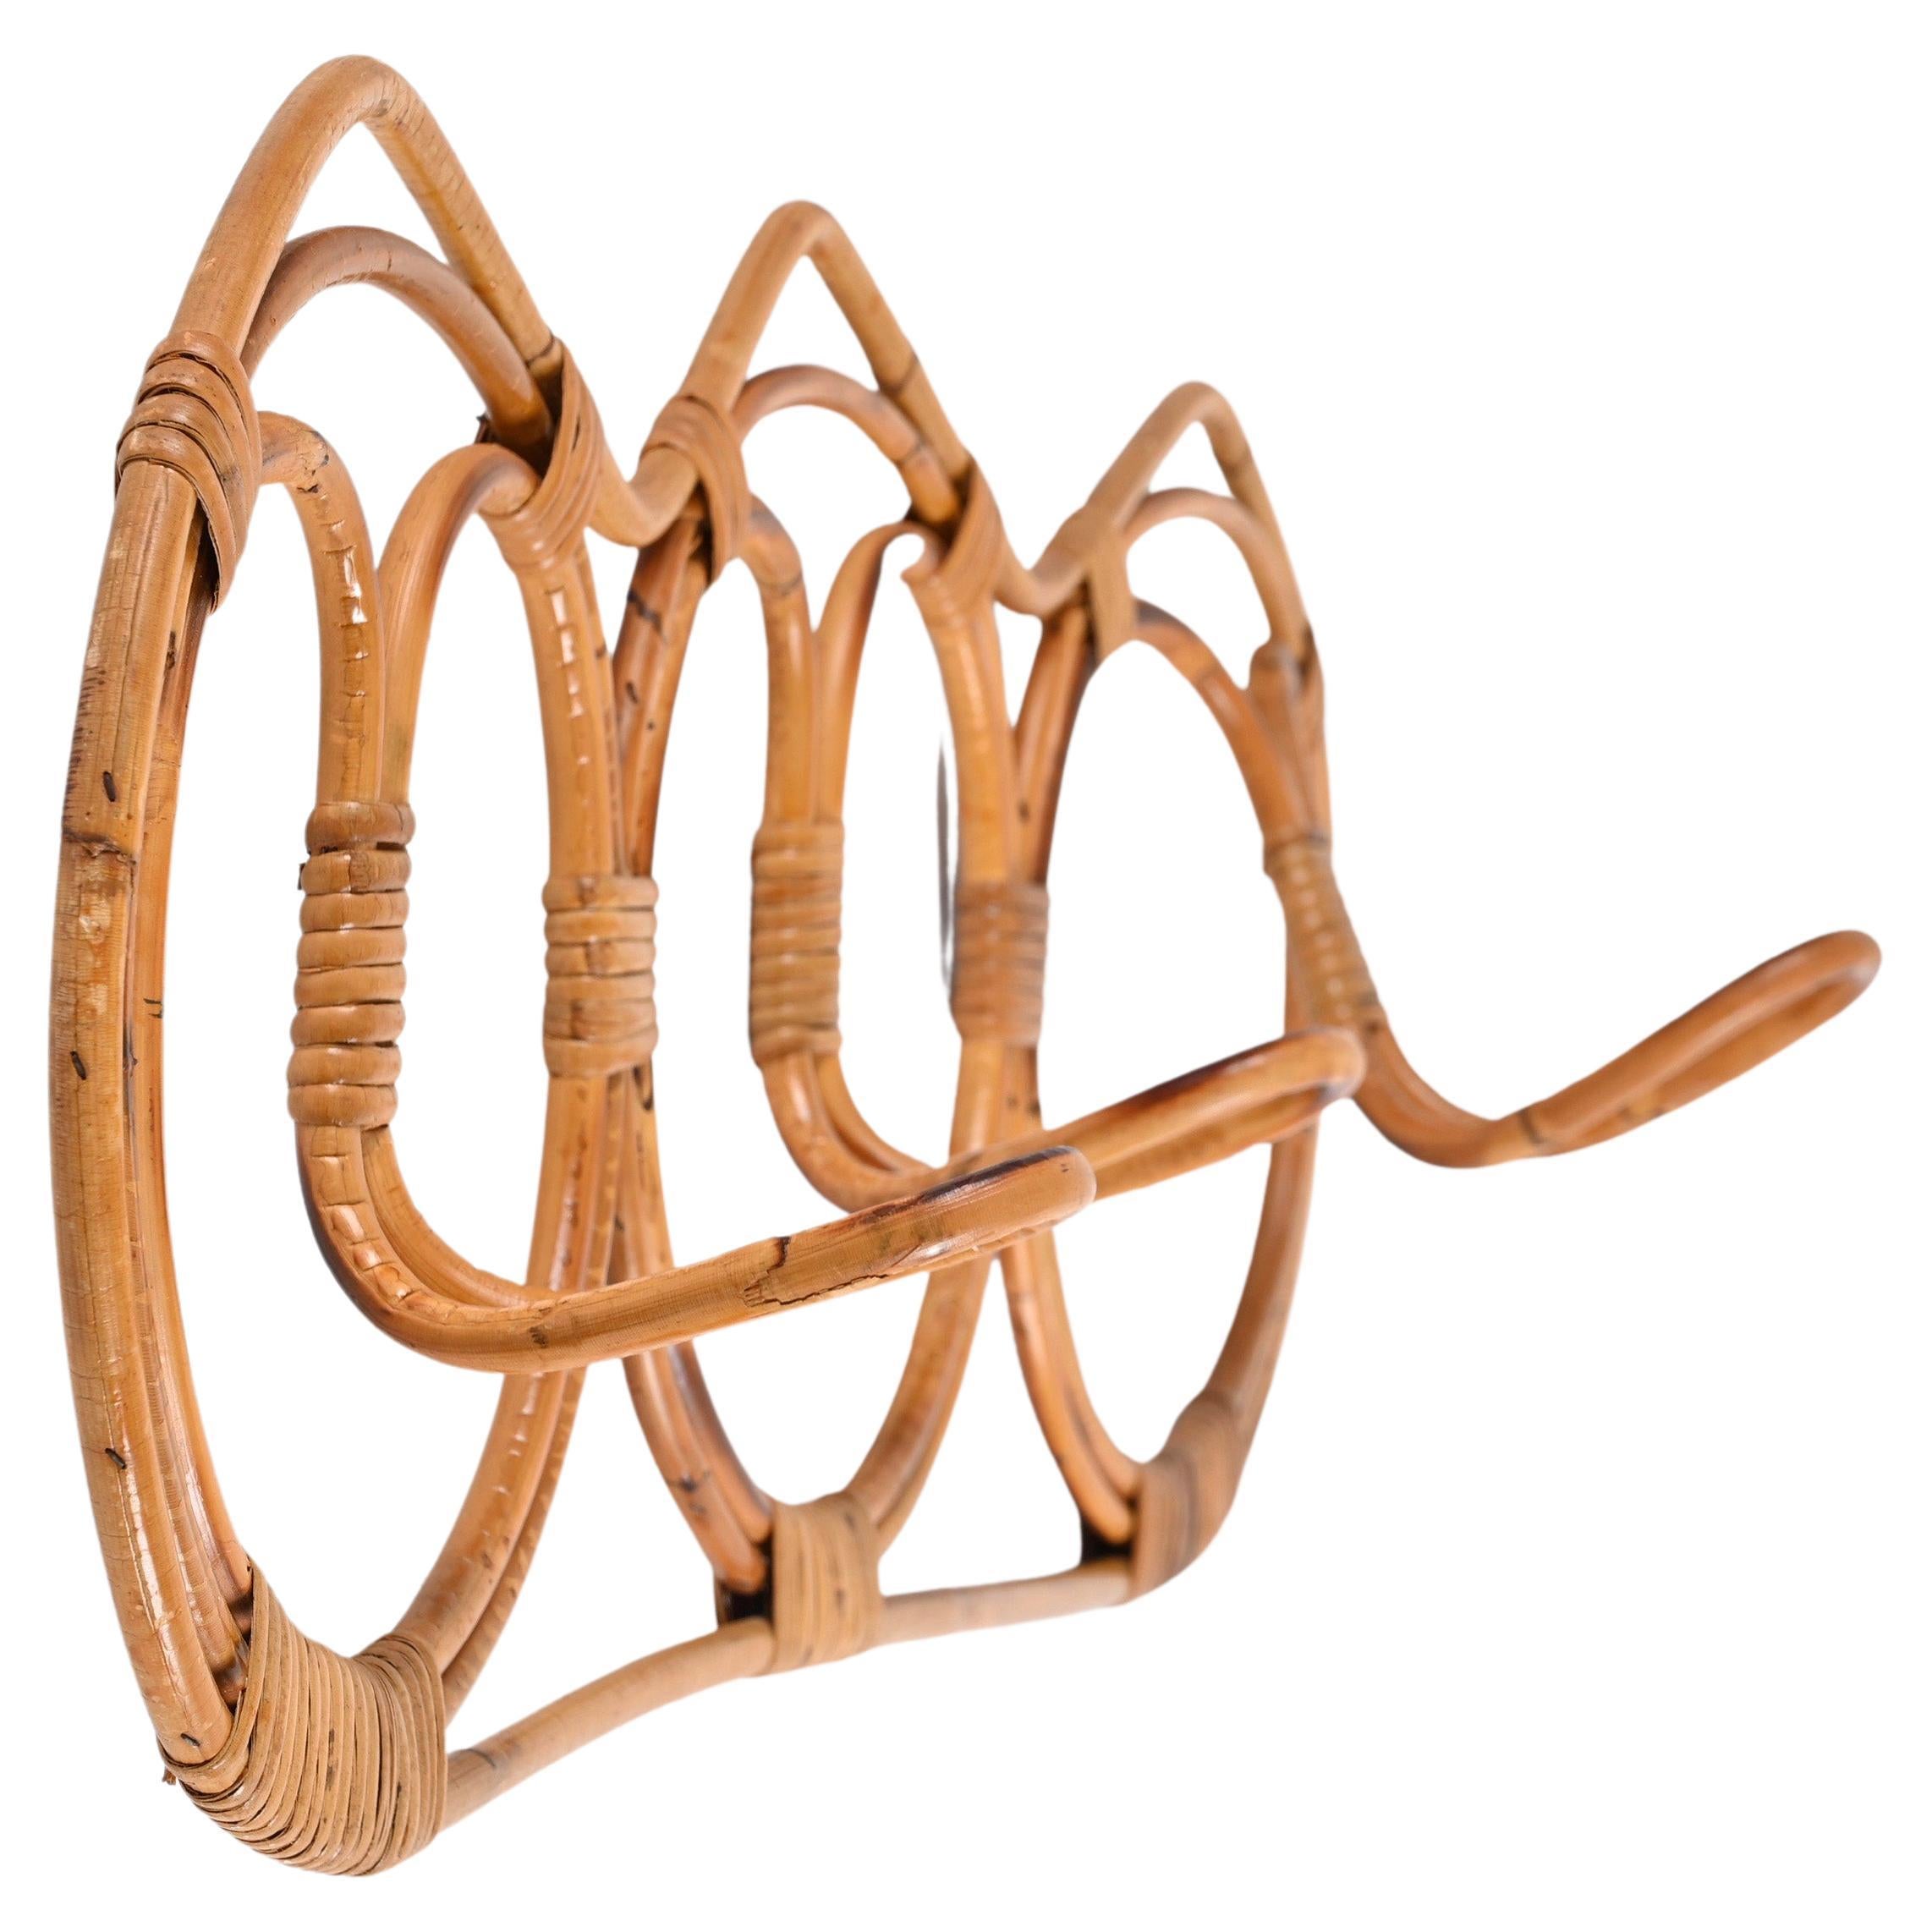 Gorgeous midcentury rattan coat or hat rack hook. This fantastic item was designed by Franco Albini and Franca Helg for Pierantonio Bonacina in Italy during 1961.

The piece represents perfectly the Italian midcentury craftsmanship produced and